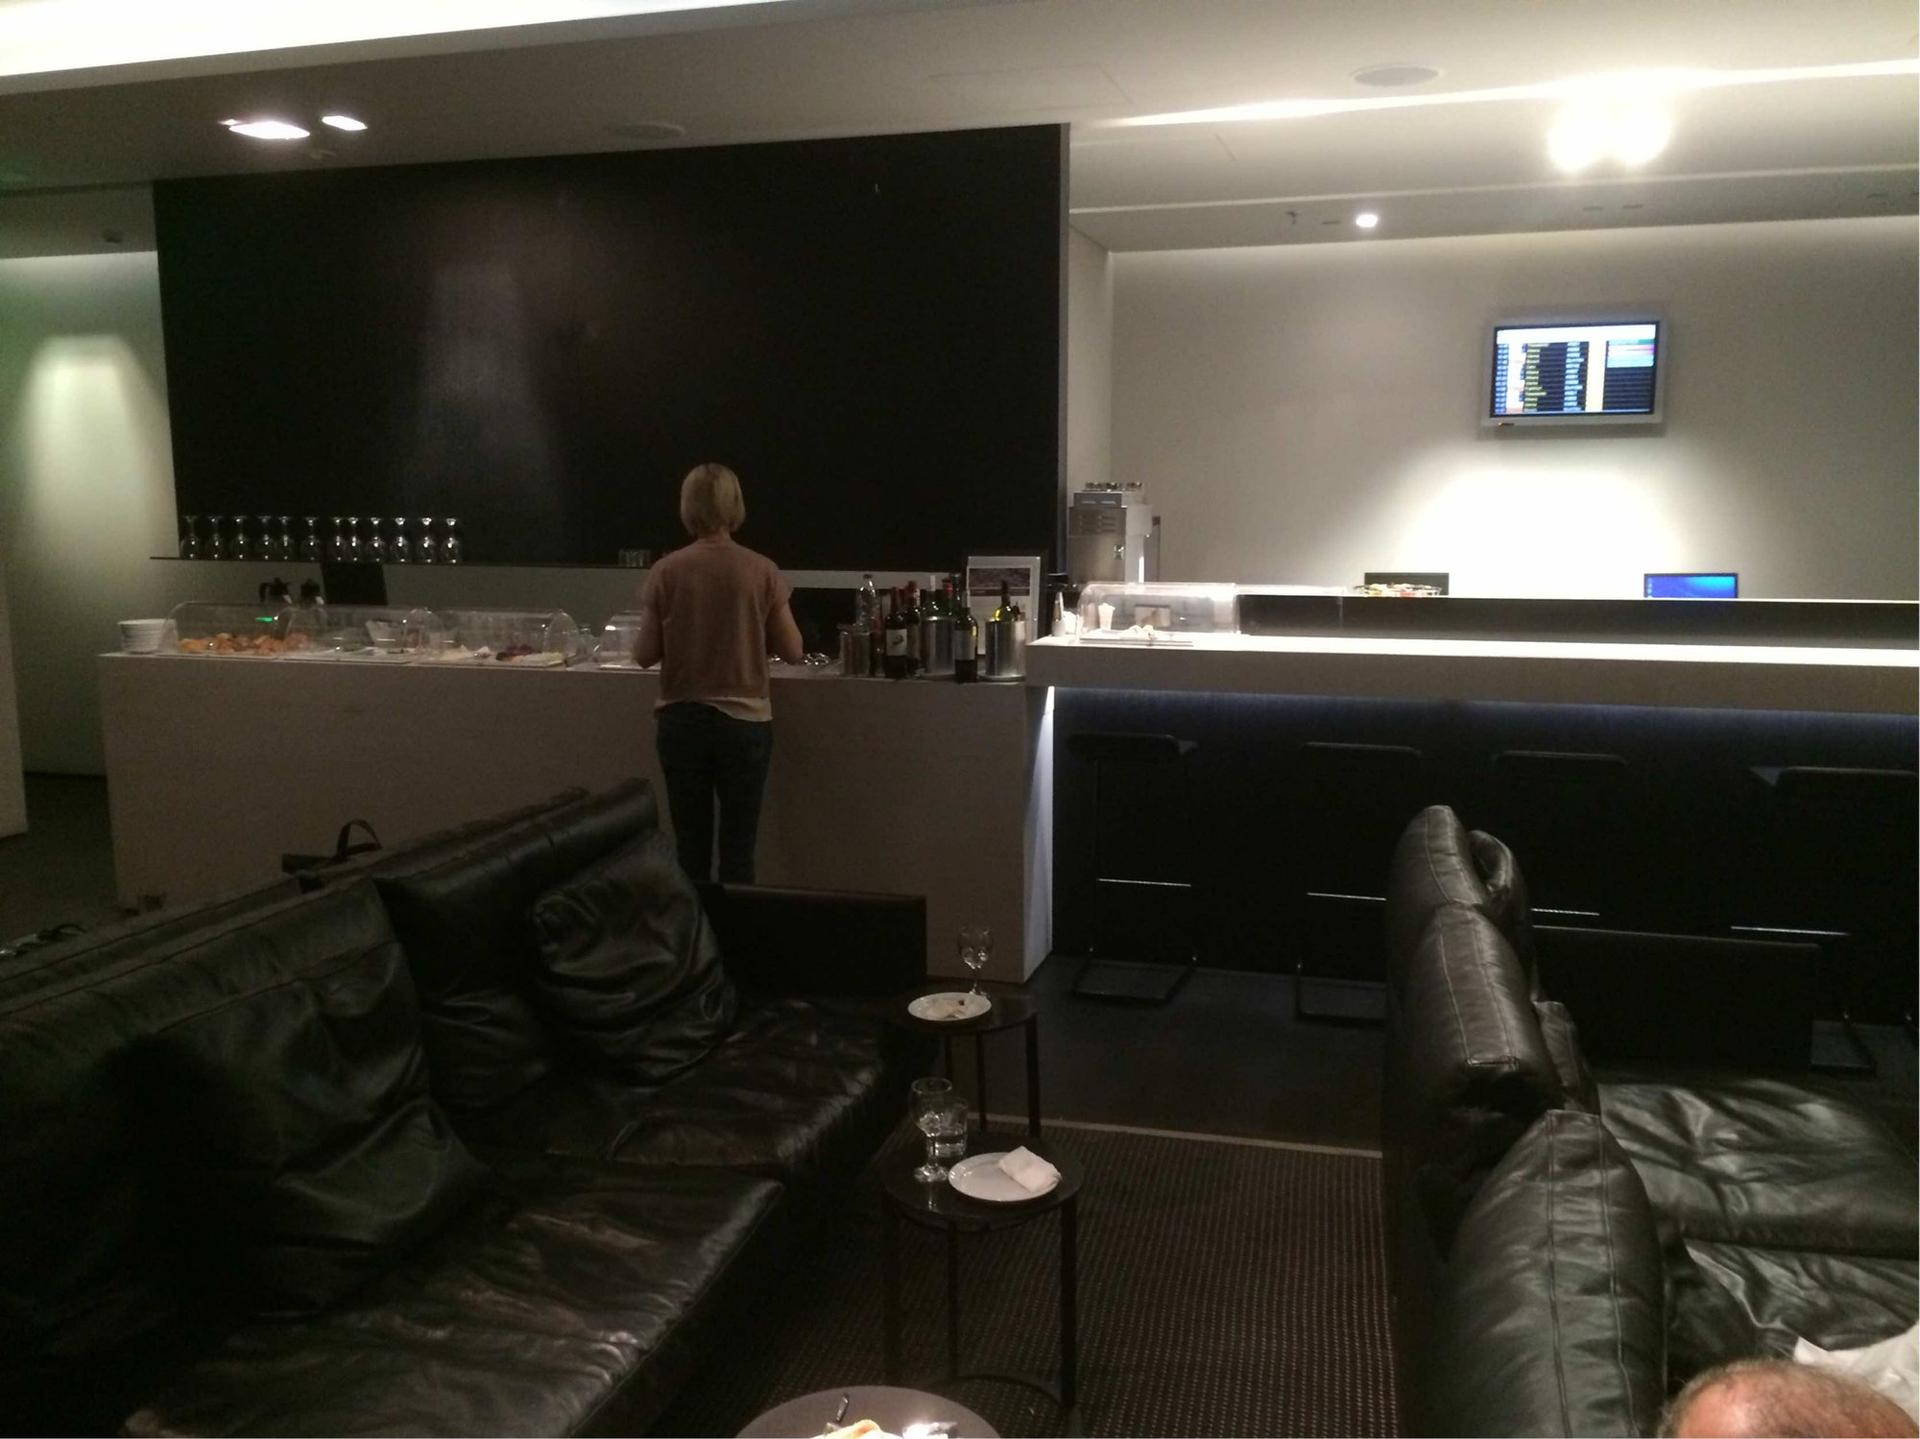 Aegean Business Lounge image 1 of 11